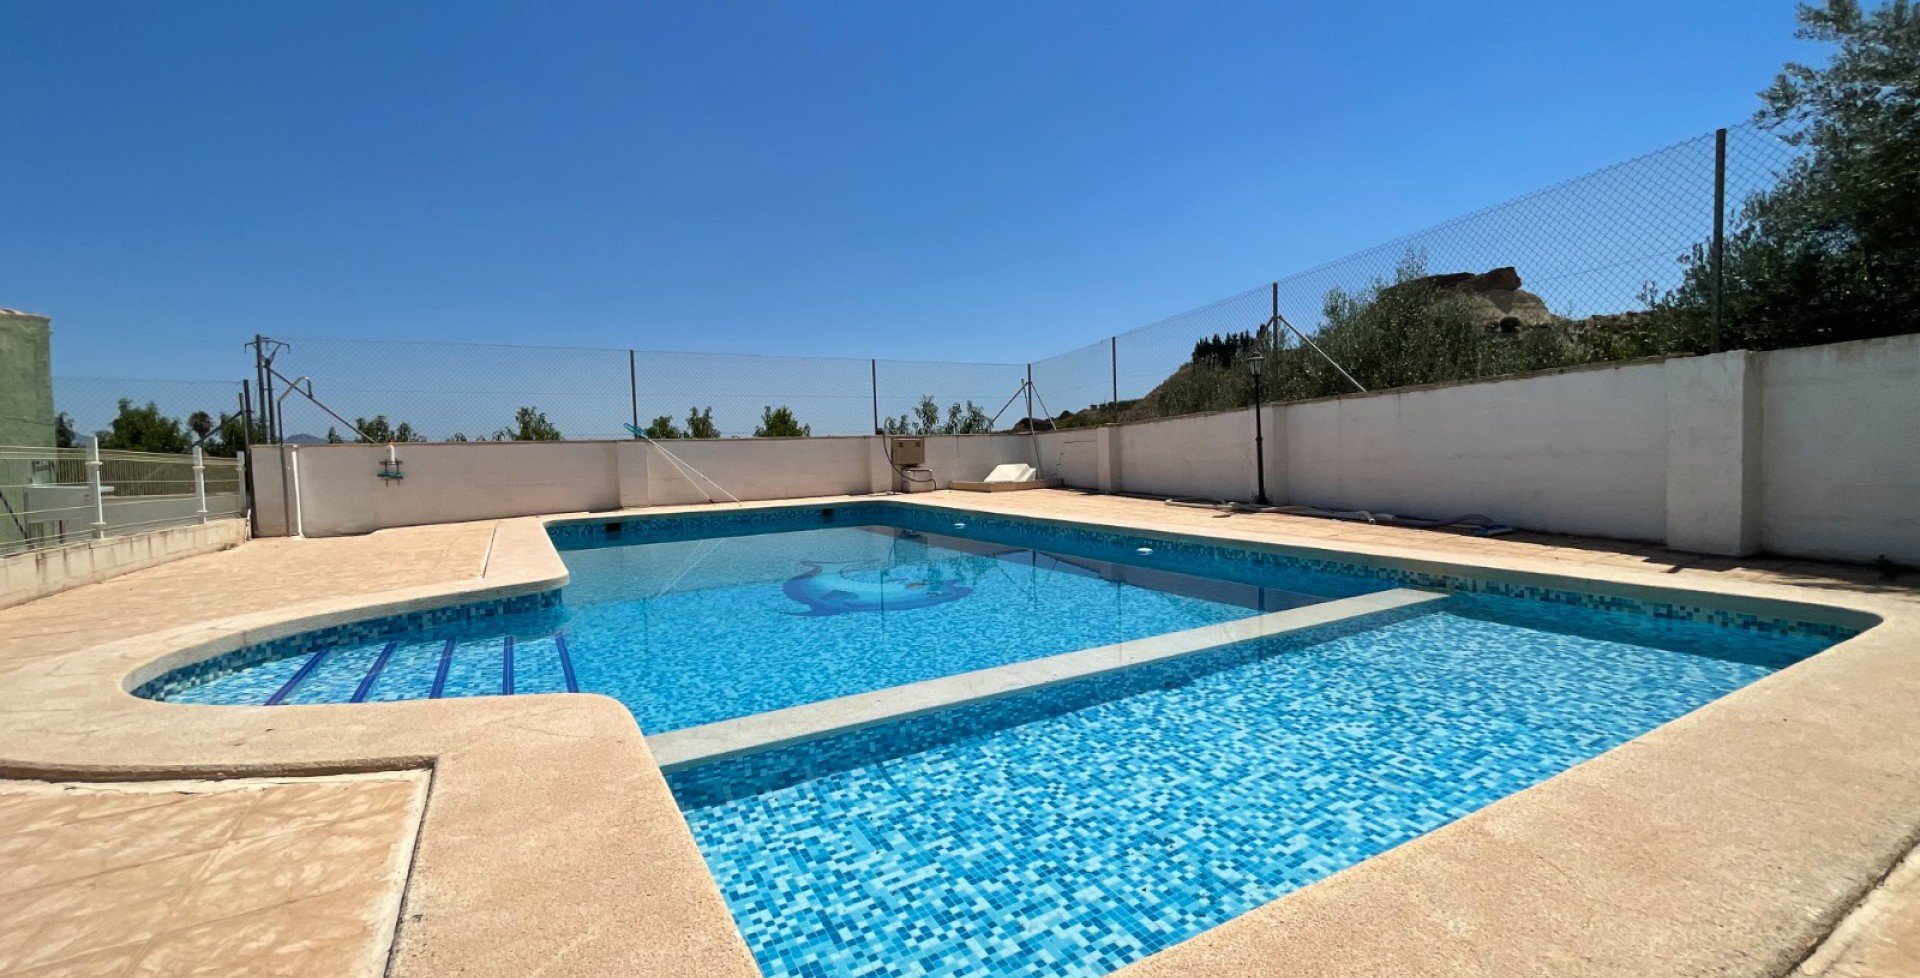 Villa with fantastic swimming pool with spectacular views, Archena, Murcia, Spain